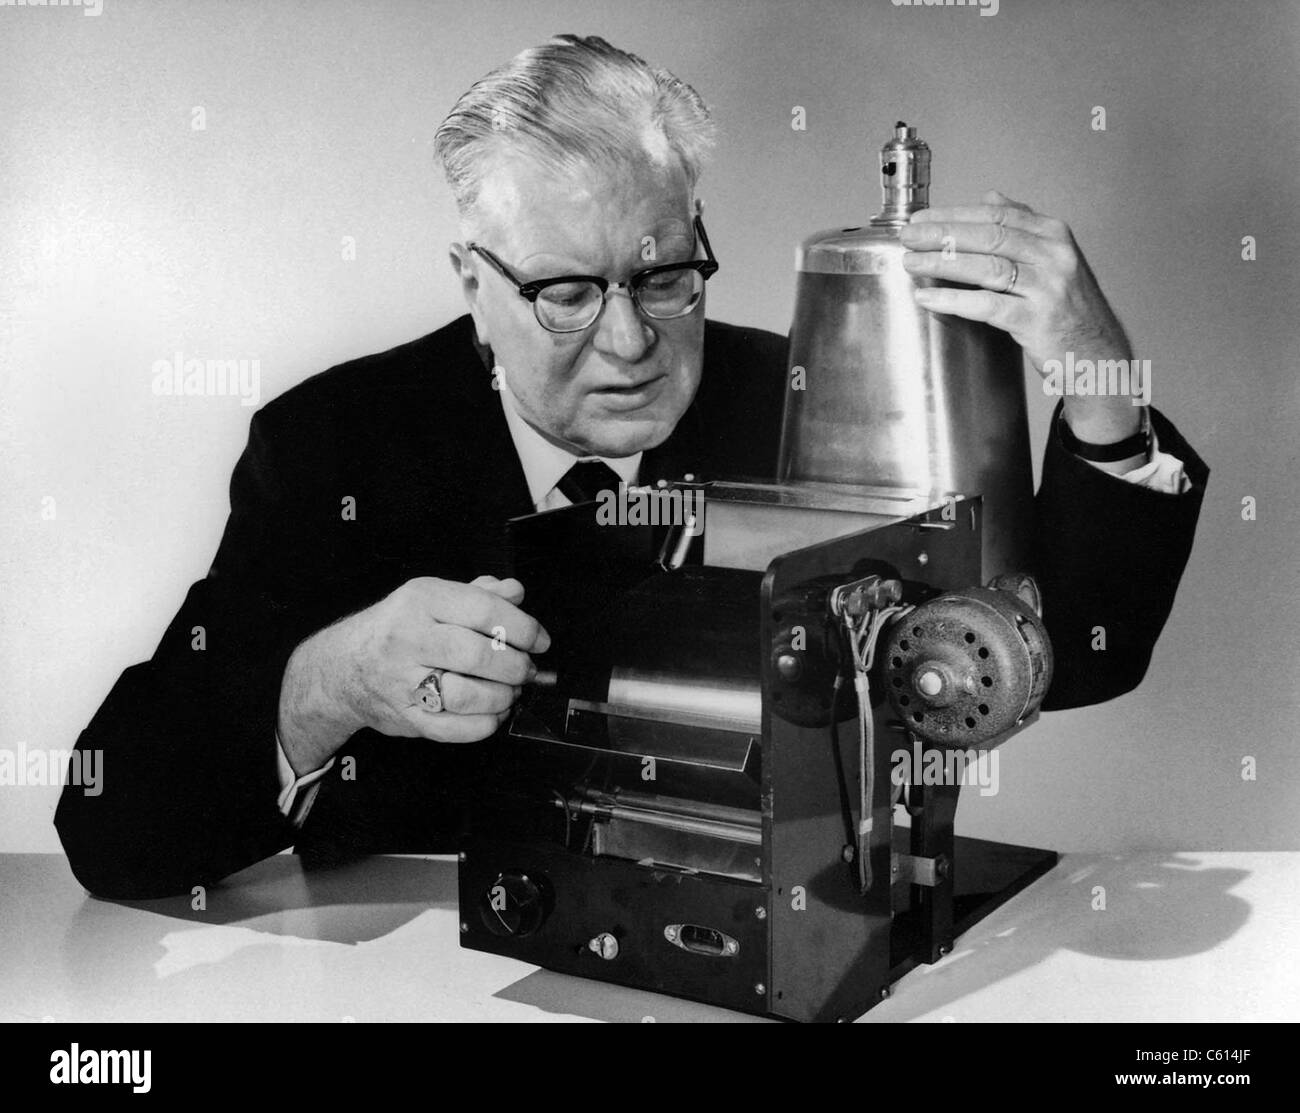 Chester Carlson 1906-1968 with the first model of his invention of 1938 that evolved over 20 years into the Xerox copier. Ca. 1960. (BSLOC 2010 18 180) Stock Photo